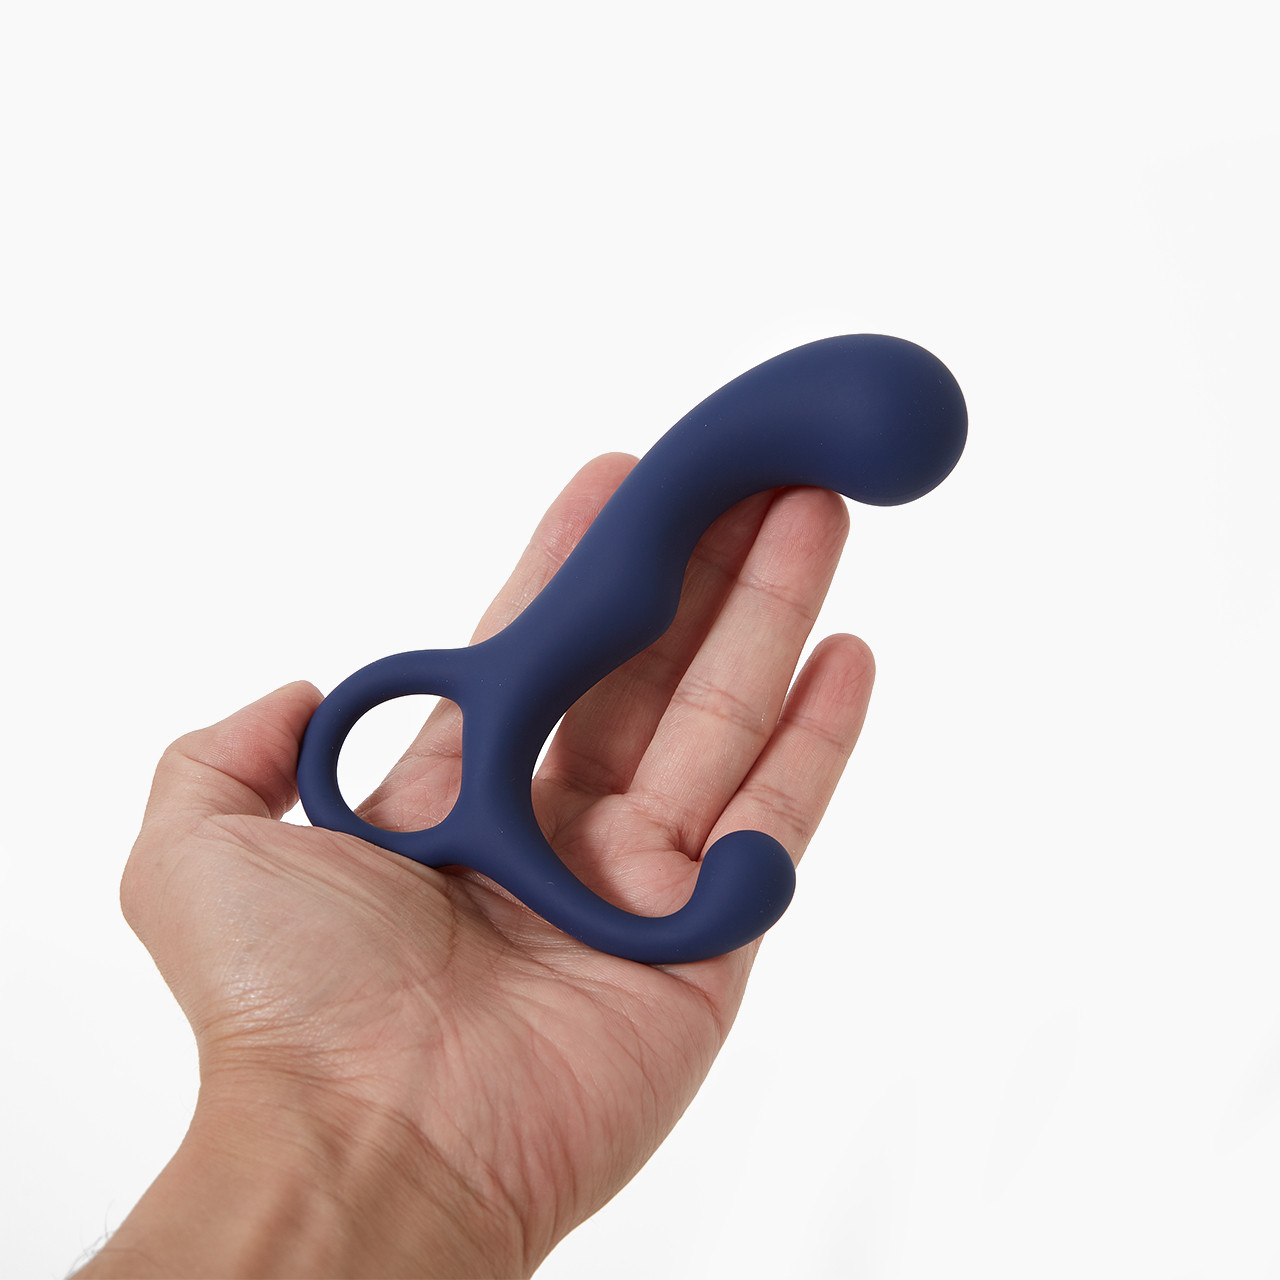 Viceroy Agility Probe', a navy silicone toy held in a hand